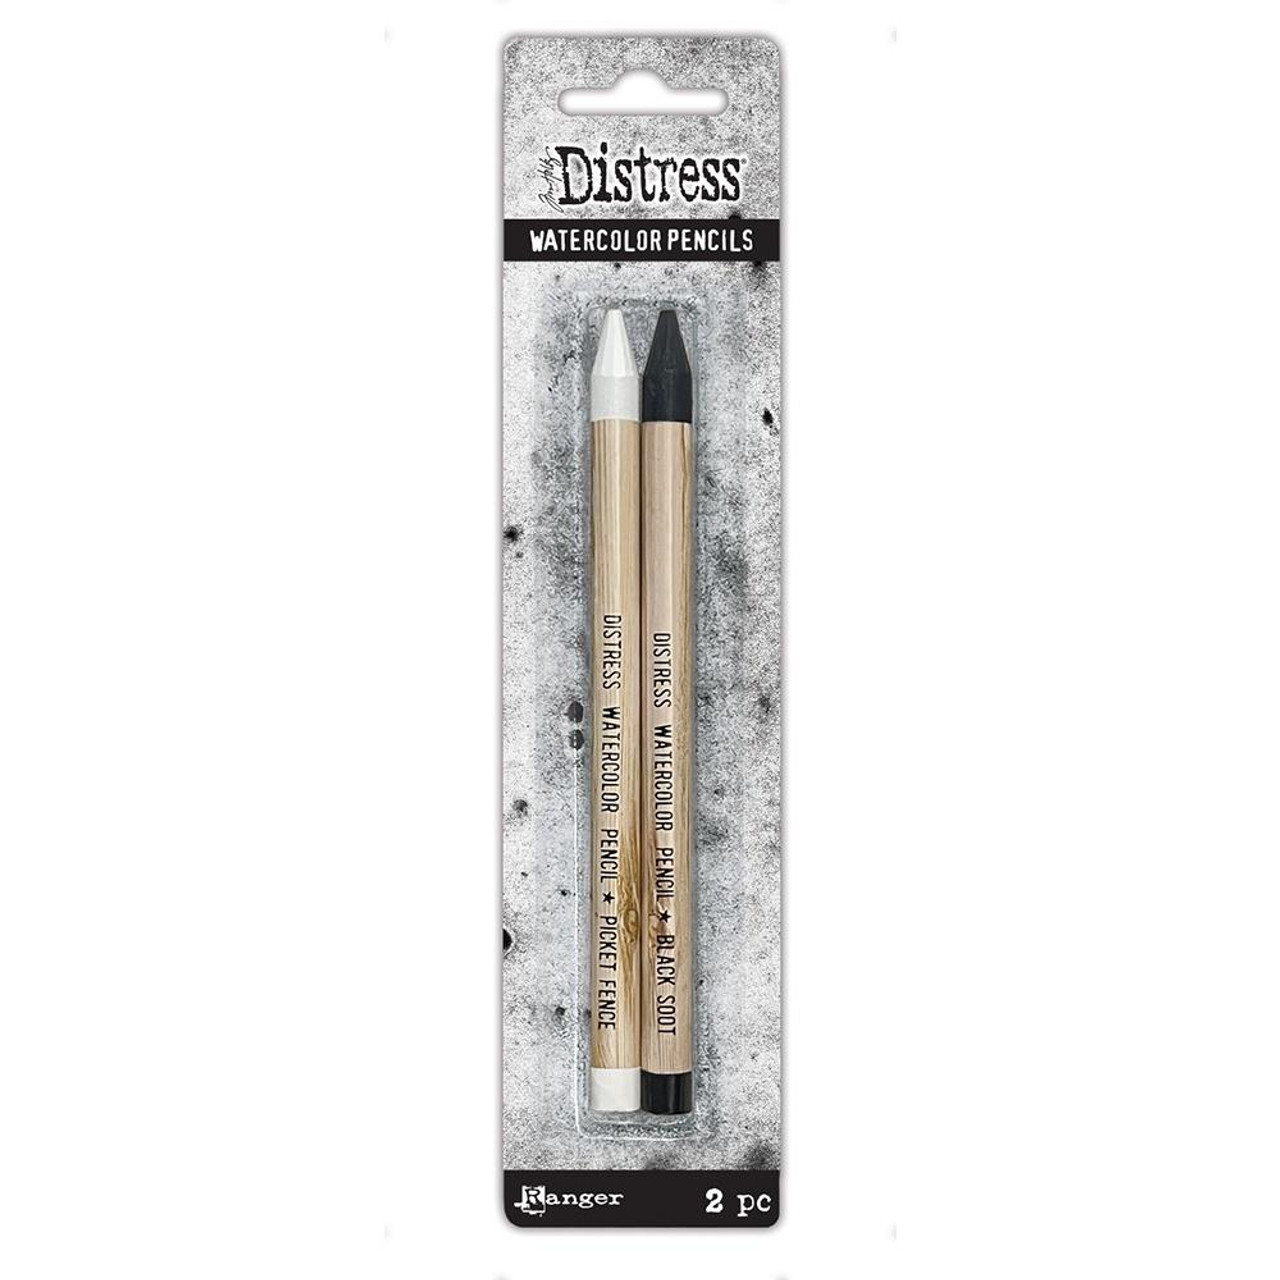 Tim Holtz Black Soot and Picket Fence Distress Watercolor Pencil